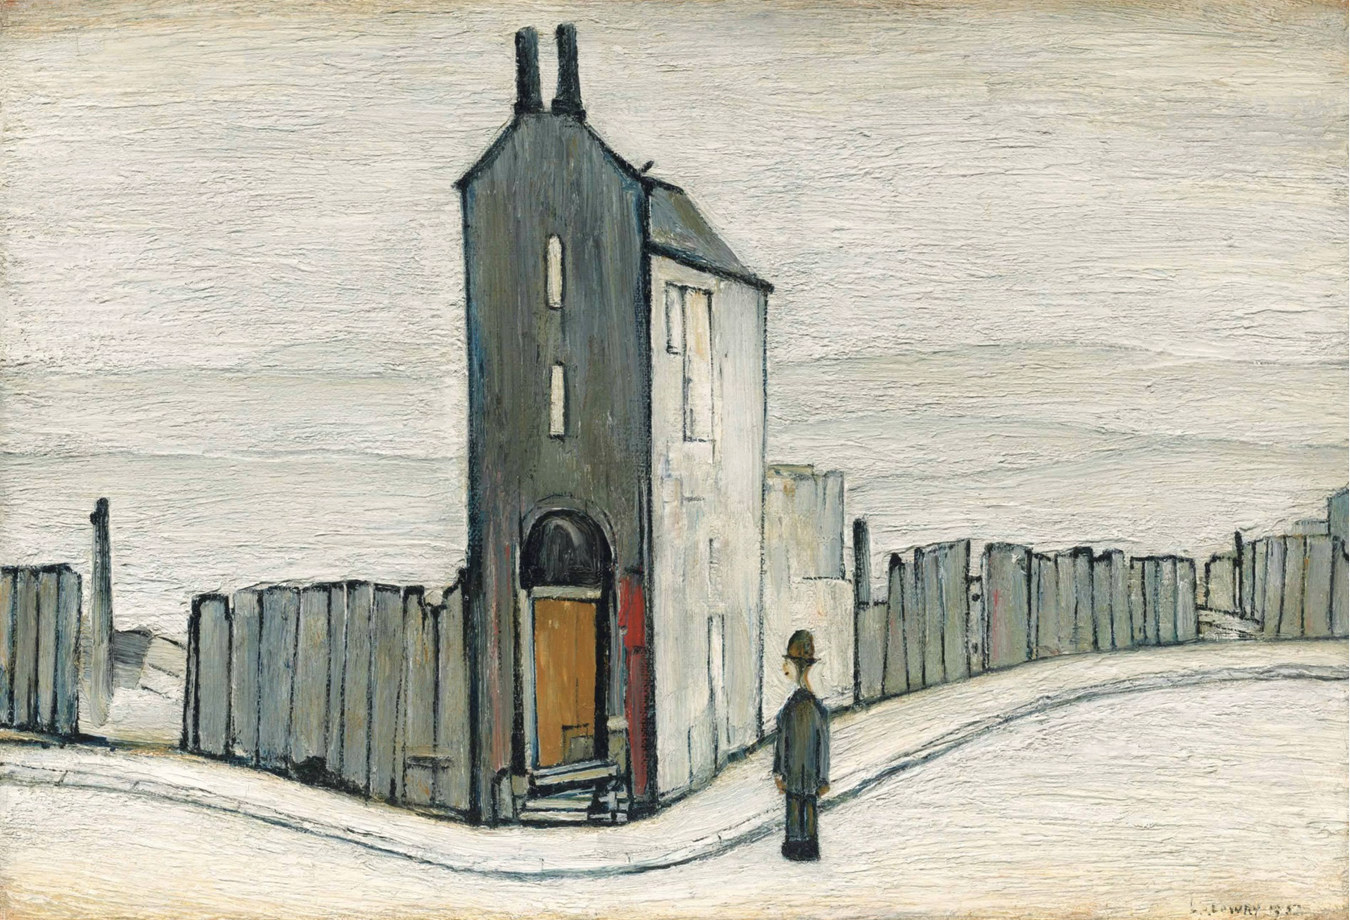 The Derelict House (1952) by Laurence Stephen Lowry (1887 - 1976), English artist.